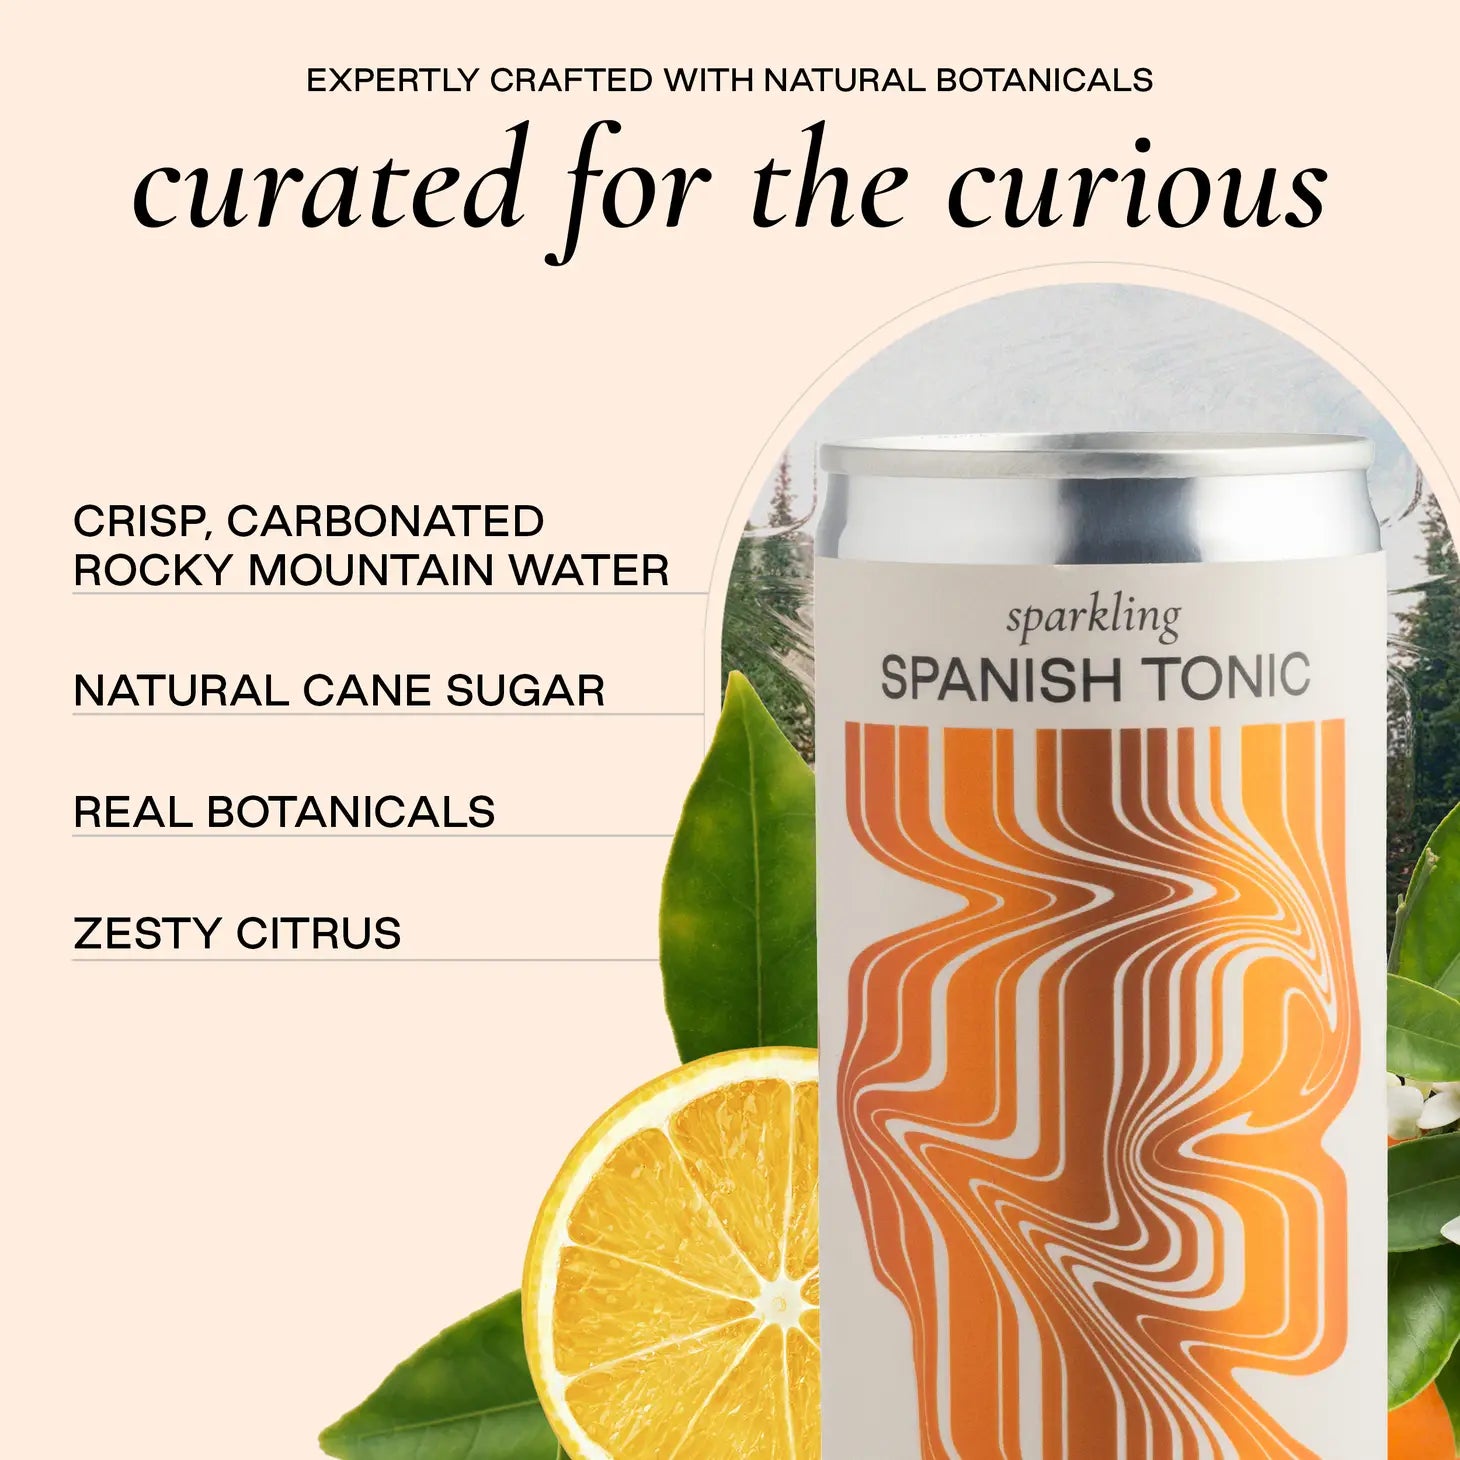 graphic that shows Spanish Tonic Water - crisp, carbonated Rocky Mountain Water, Natural Cane Sugar, Real Botanicals, Zesty Citrus